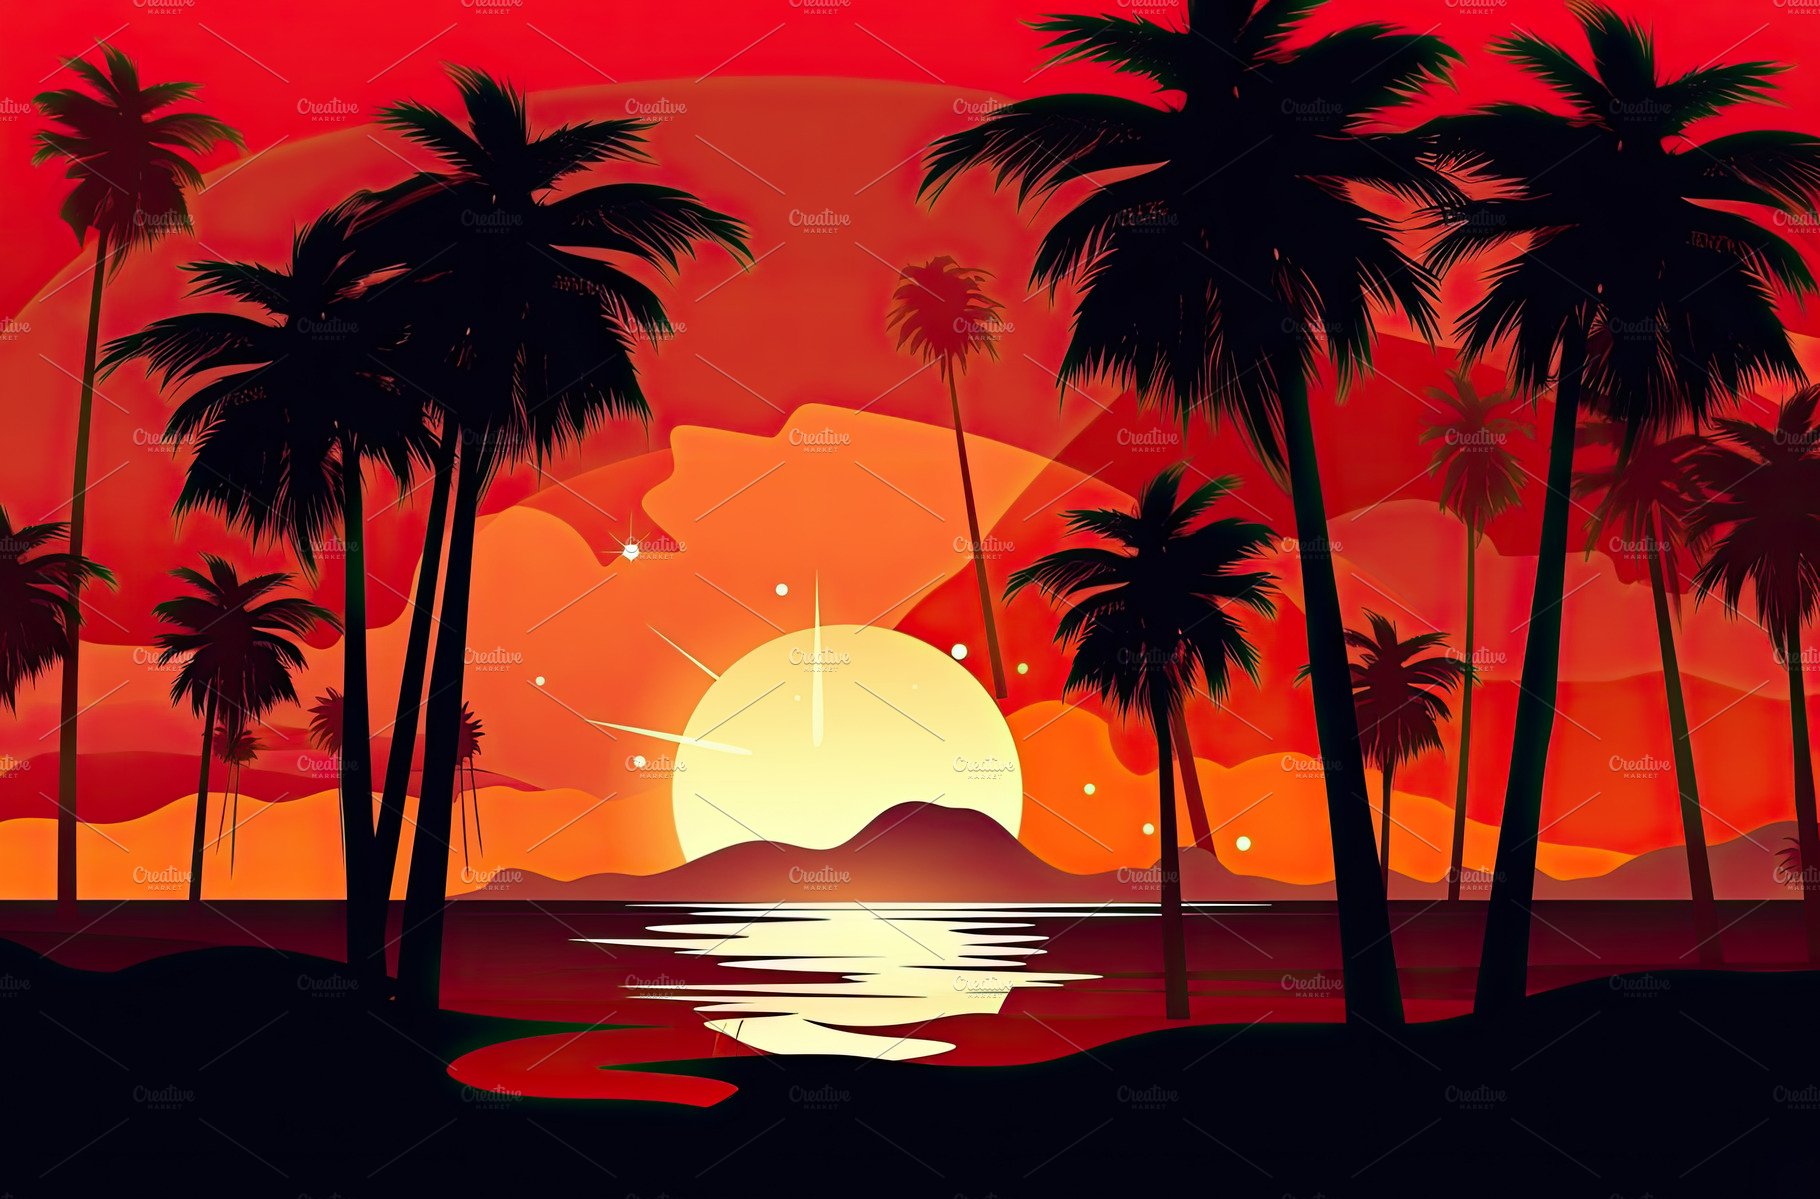 Orange sunset landscape. Evening on the beach with palm trees. G cover image.